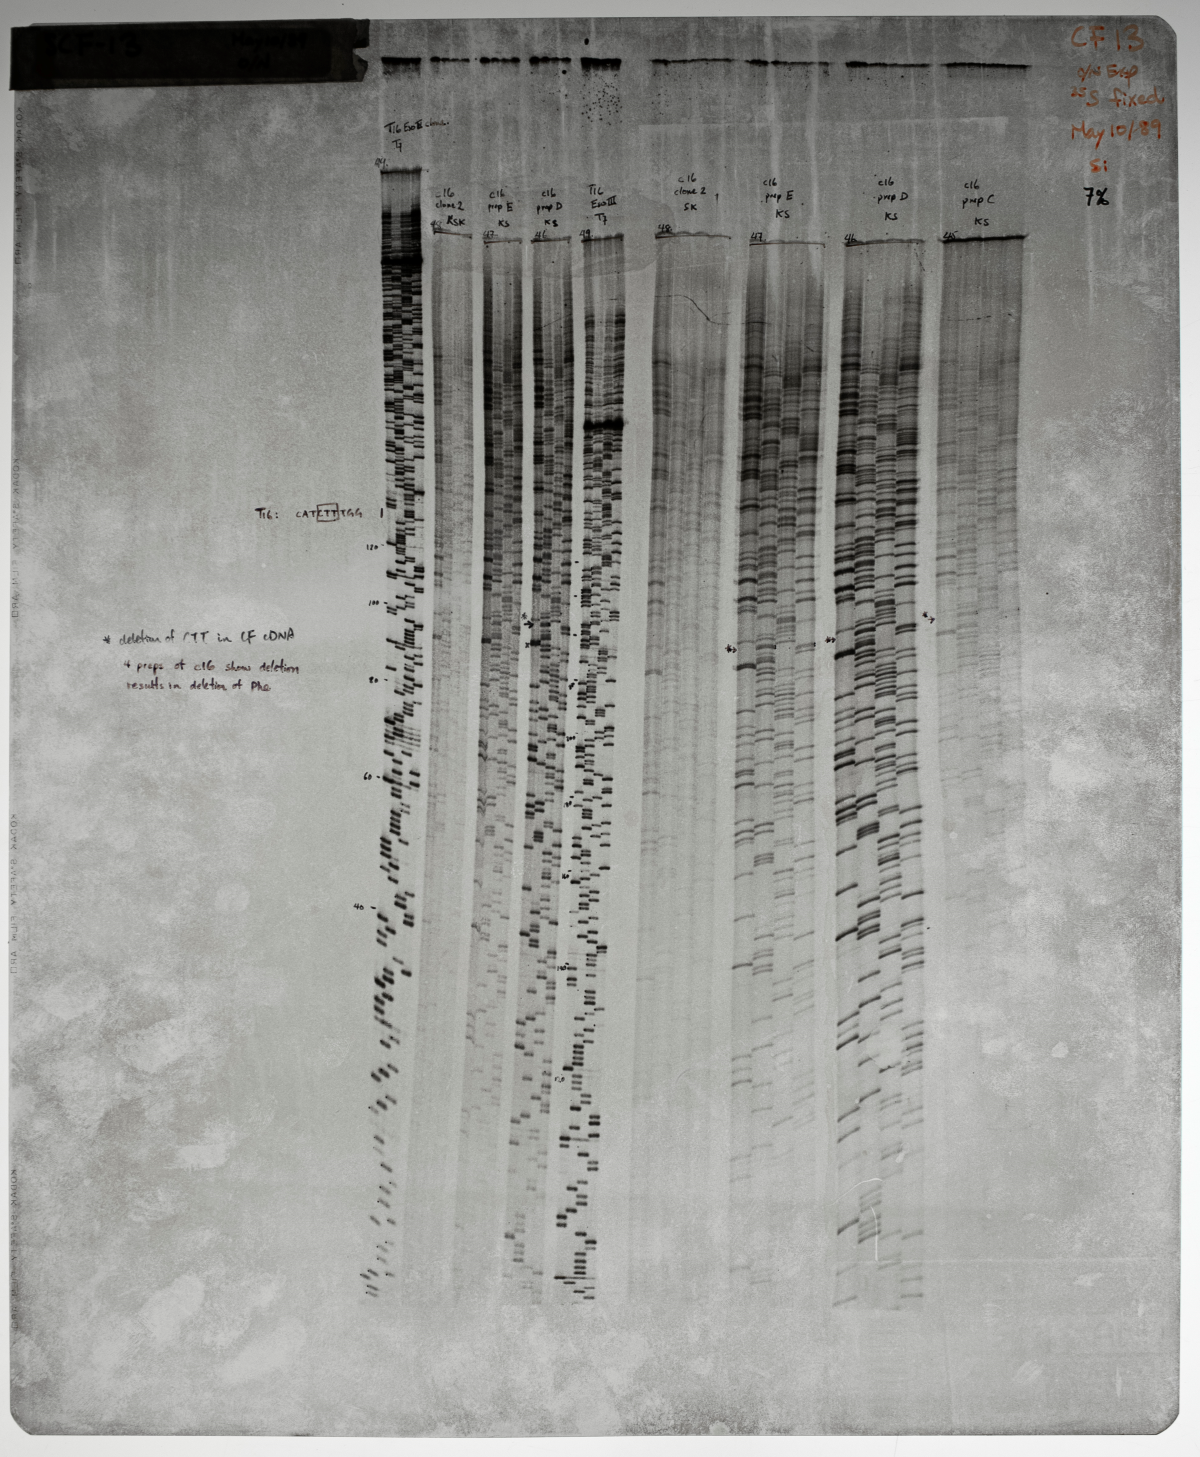 A gel electrophoresis of the cystic fibrosis gene. The scan shows several long rectangular strands with patterns of black, grey and white